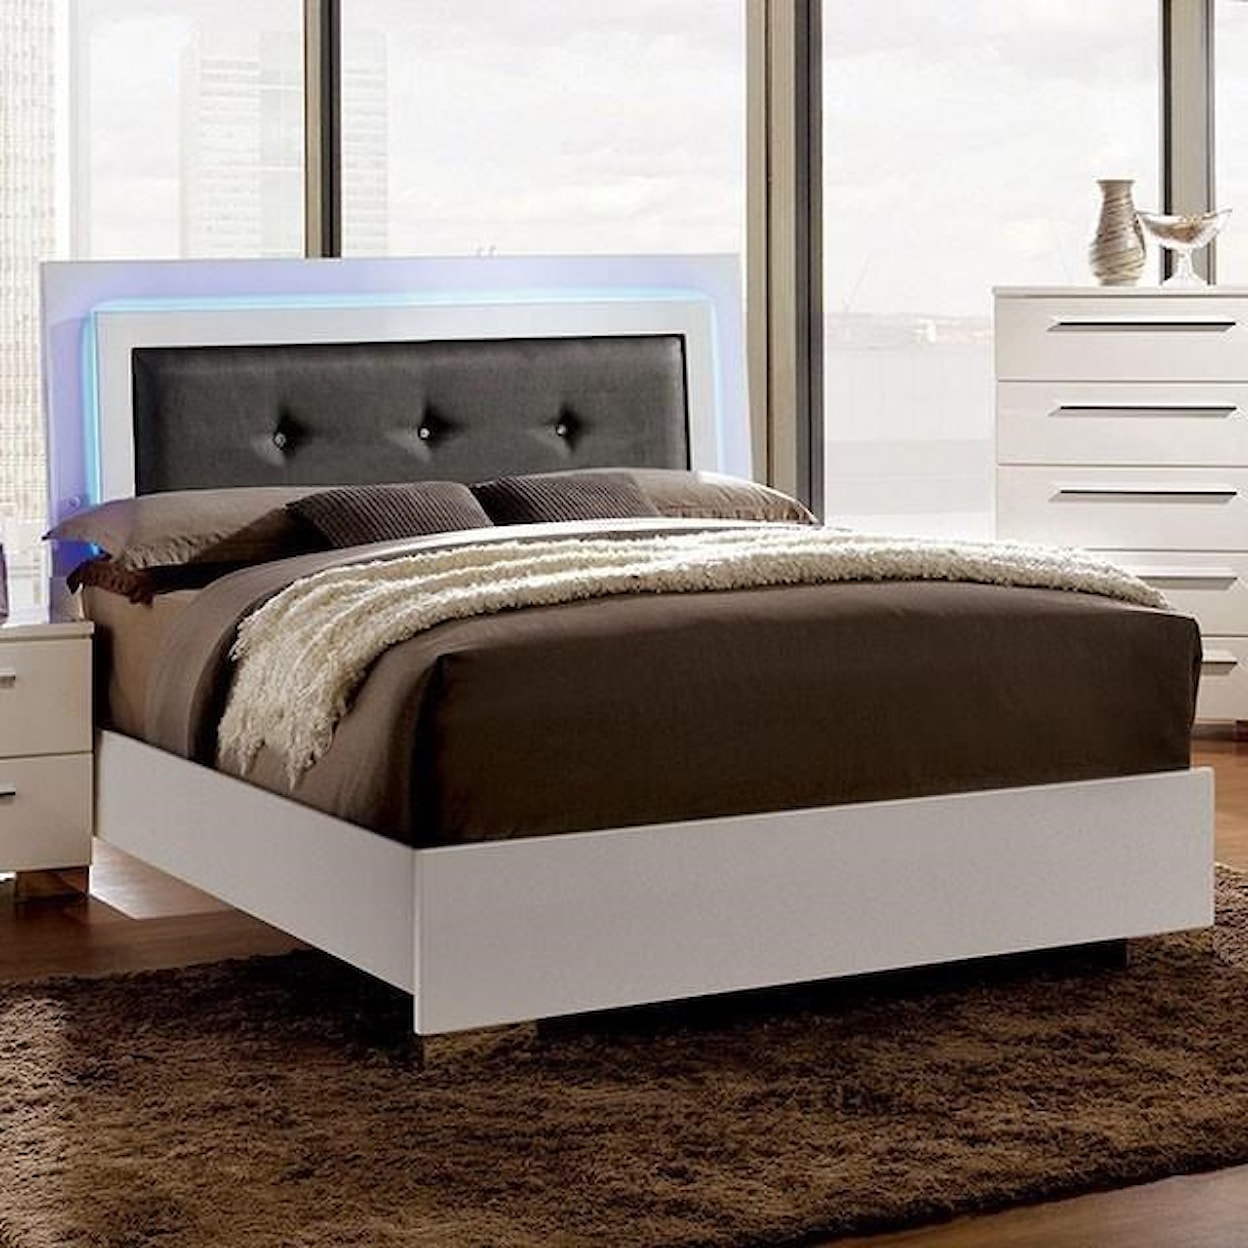 Furniture of America Clementine Full Bed